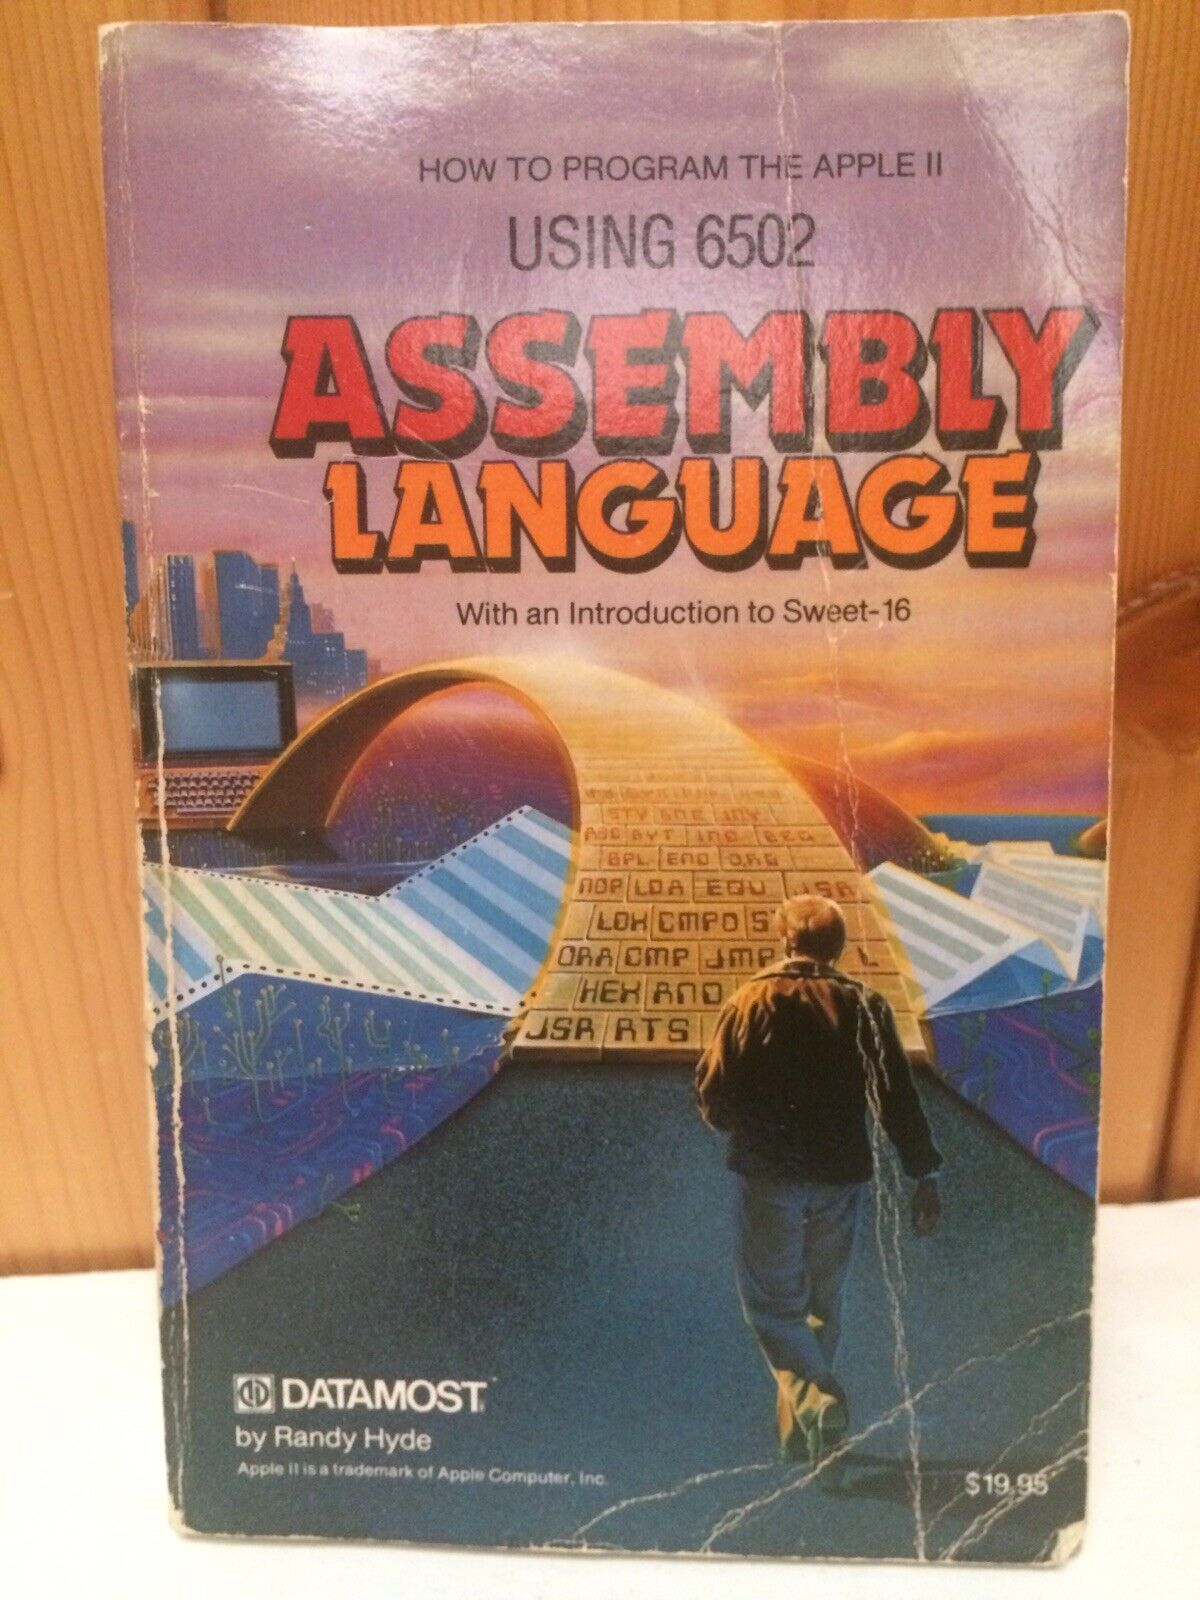 1982 PROGRAM APPLE II USING 6502 ASSEMBLY LANGUAGE COMPUTER BOOK Used/Creases